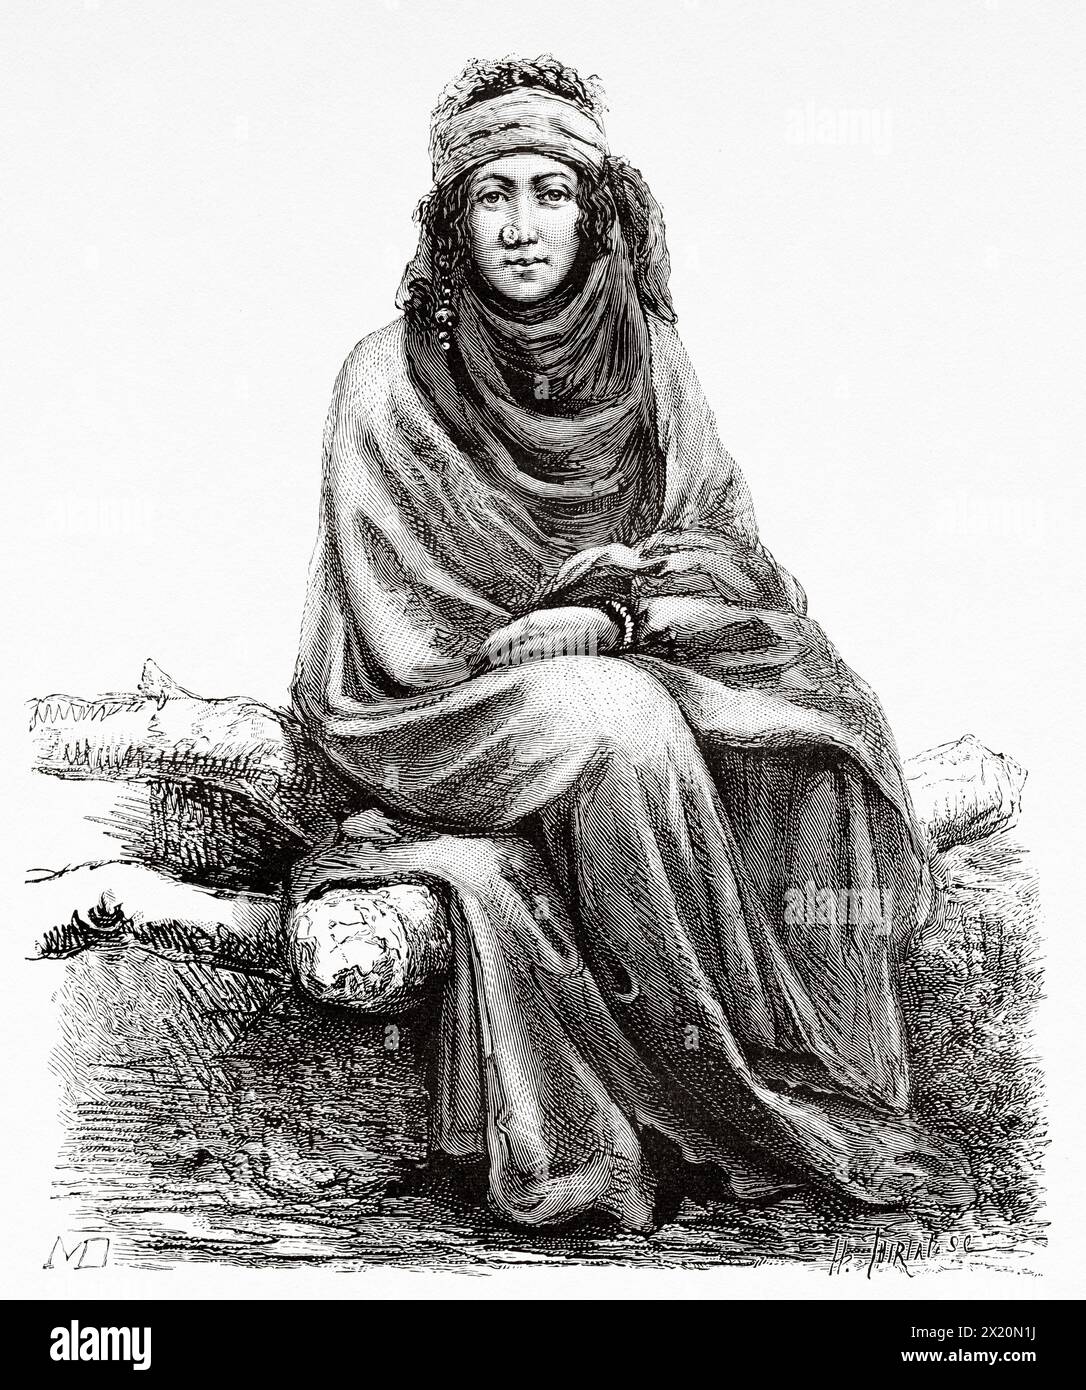 Arab woman from the Banu Lam tribe, Iraq. Middle East. Drawing by Jane Dieulafoy. Persia, Chaldea and Susiana 1881-1882 by Jane Dieulafoy (1851 - 1916) Le Tour du Monde 1886 Stock Photo